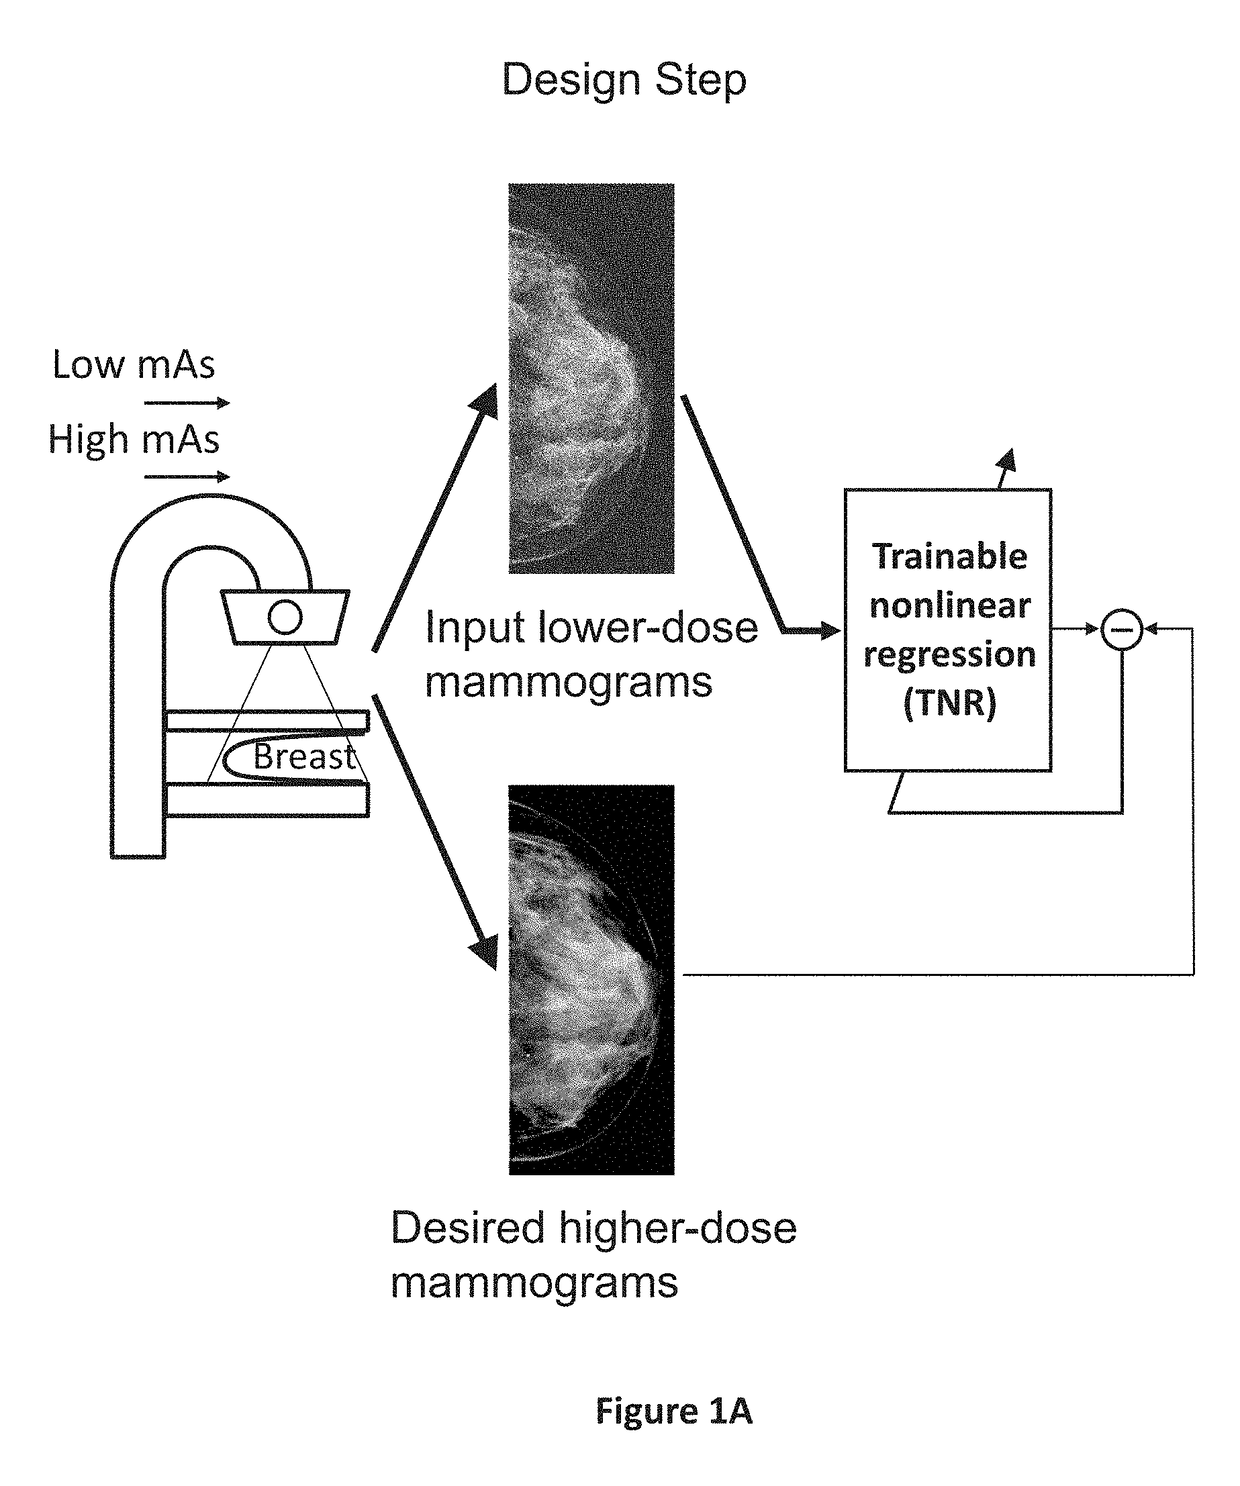 Converting low-dose to higher dose mammographic images through machine-learning processes